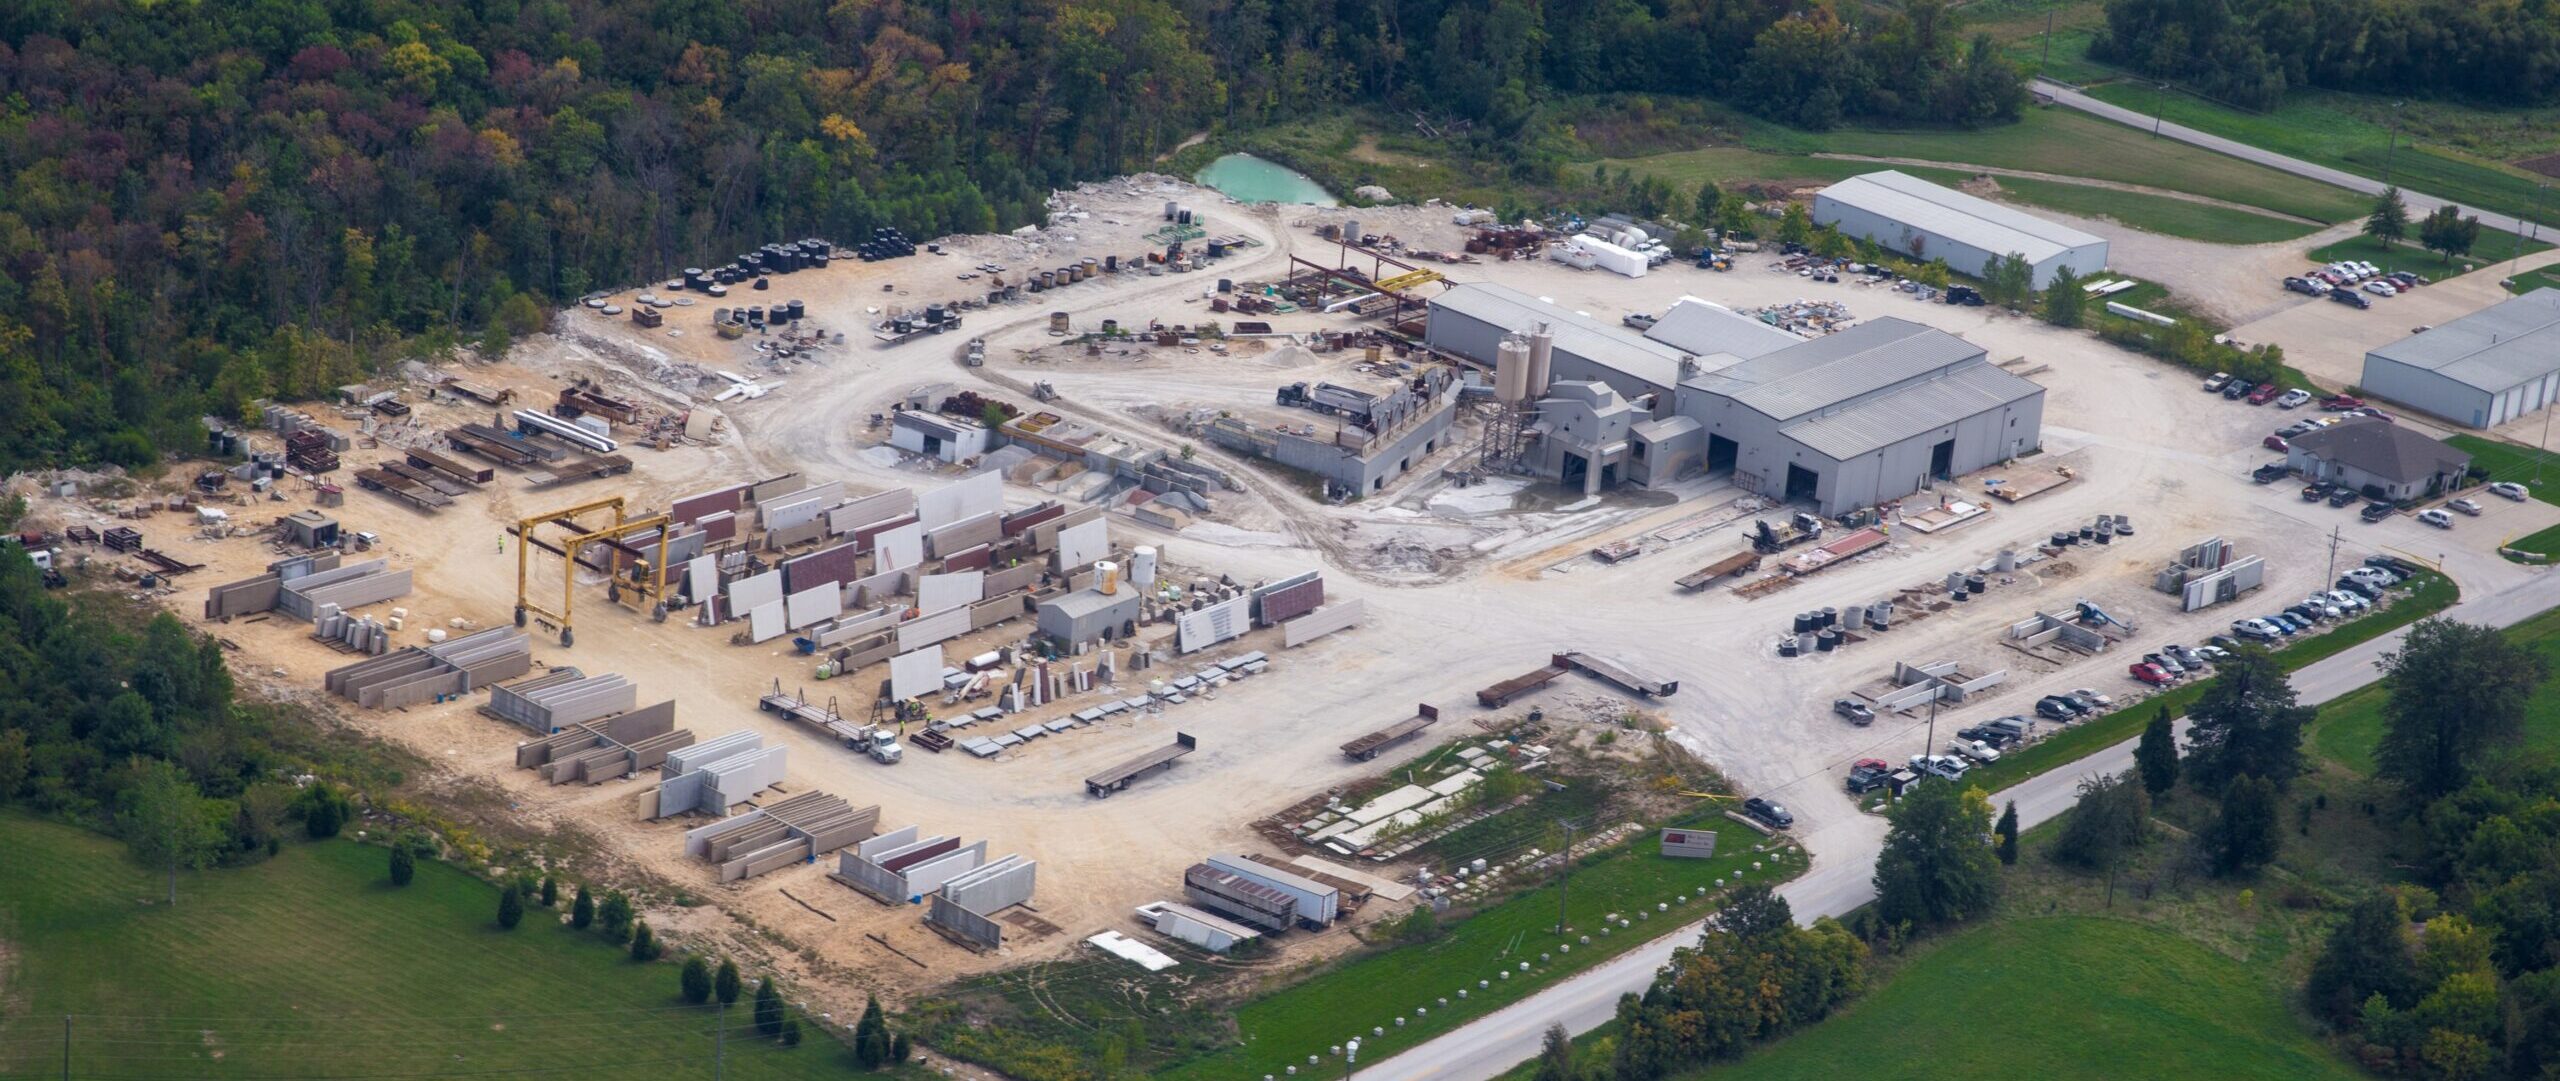 MIDAMERICA PRECAST The Midwest’s #1 manufacturer of architectural, structural precast and utility concrete products